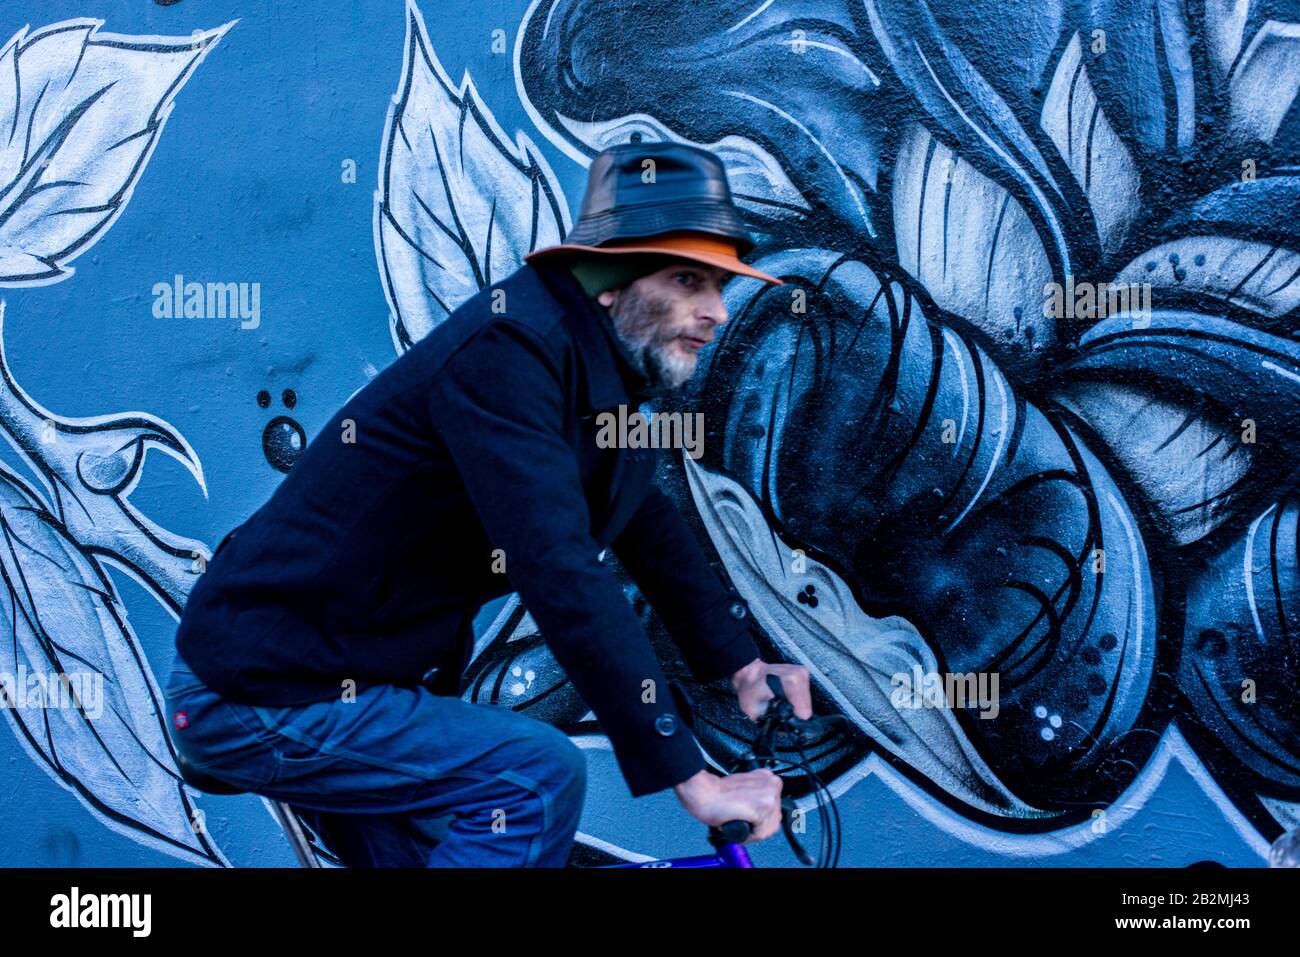 A man dressed in blue cycles past a piece of blue flower-patterned piece of graffiti art while wearing two hats on top of each other. Stock Photo